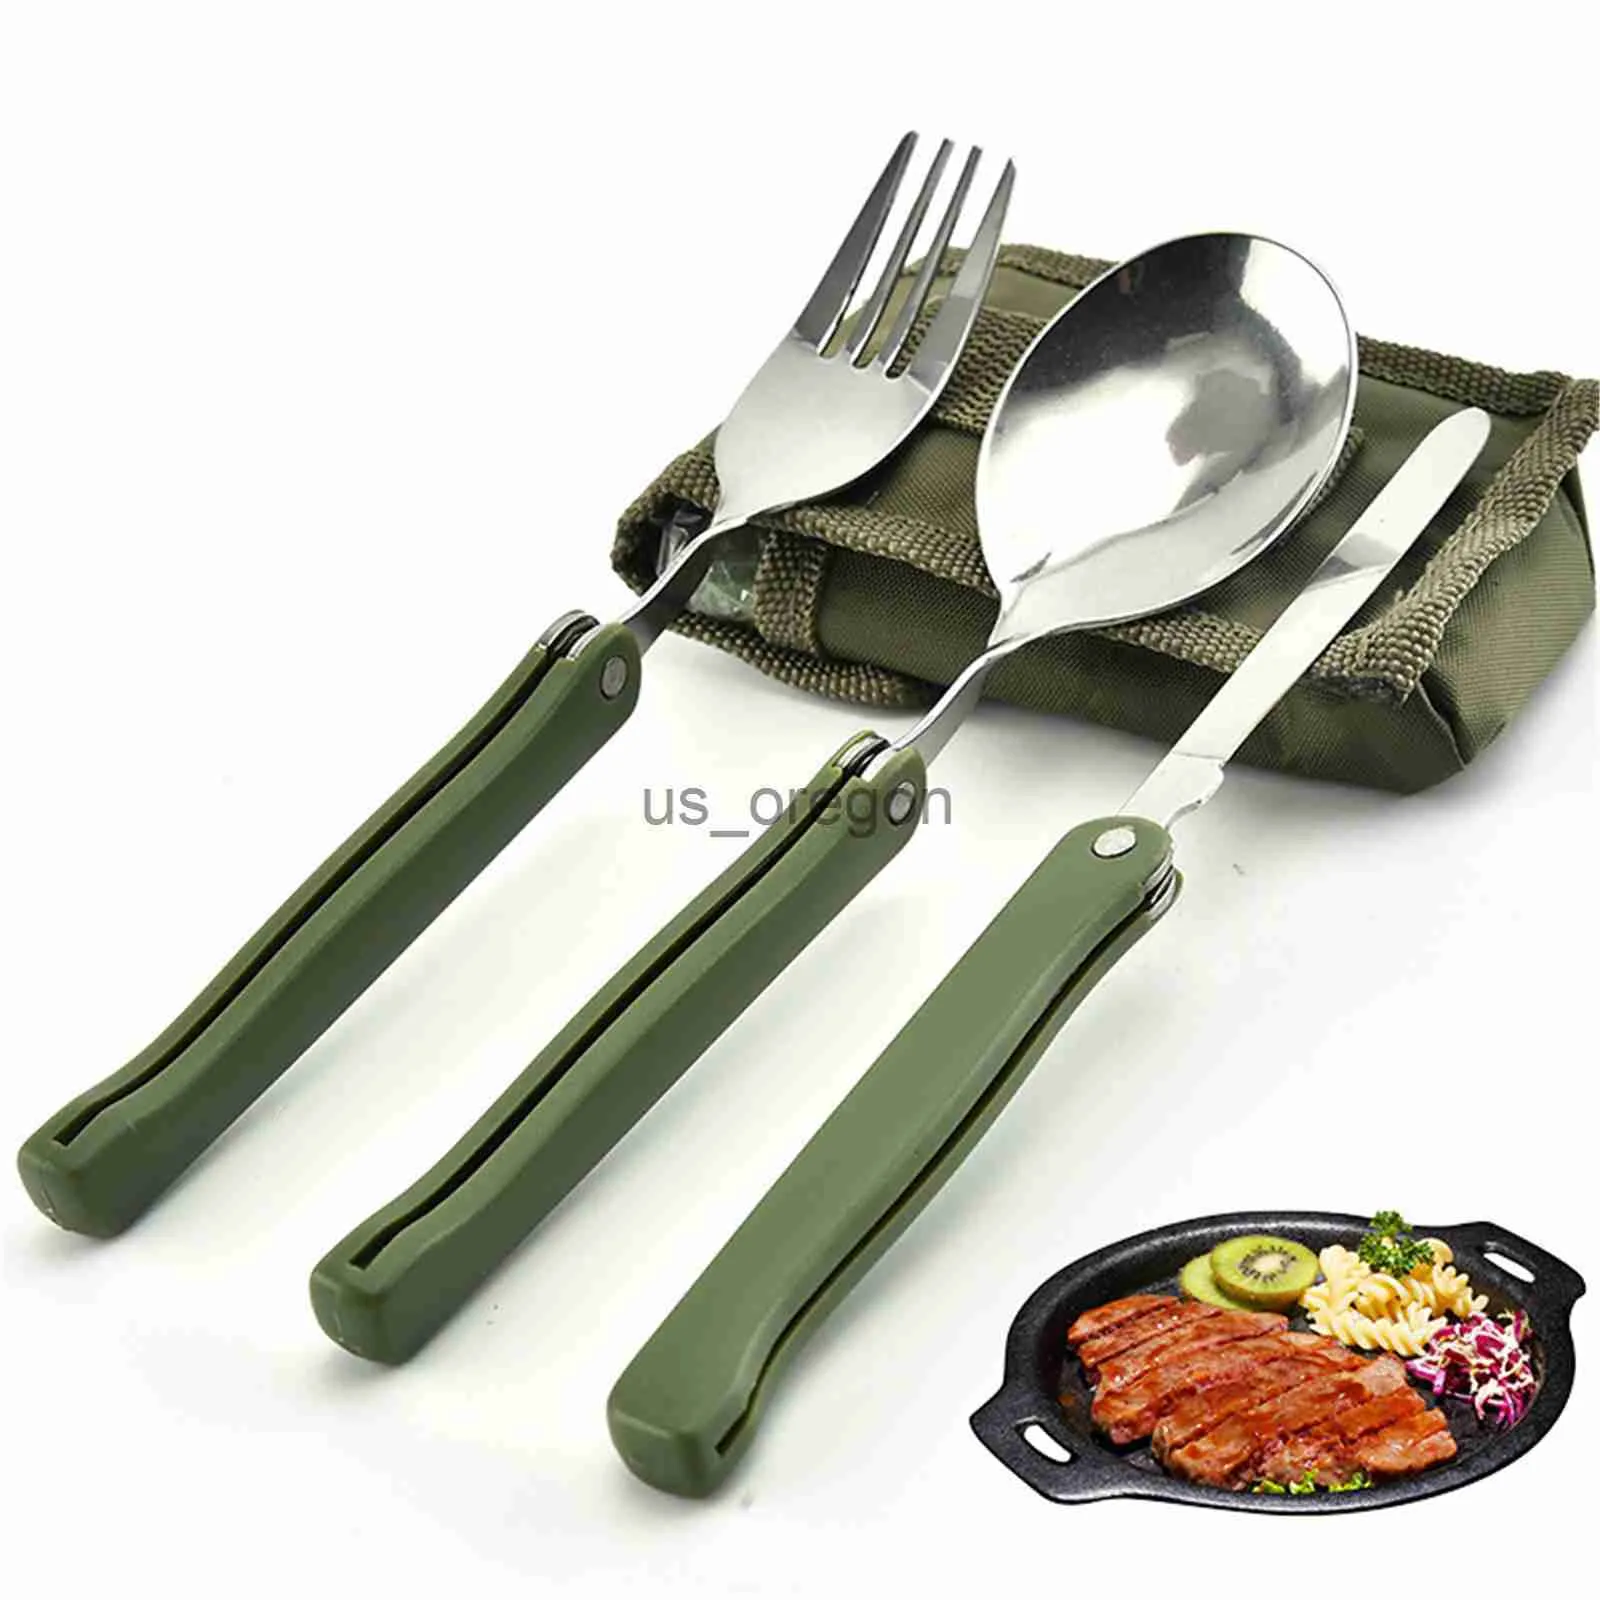 Dinnerware Sets Stainless Steel Portable Folding Cutlery Set Fork Knife With Army Green Pouch Survival Camping Bag Outdoor Cutlery Container x0703